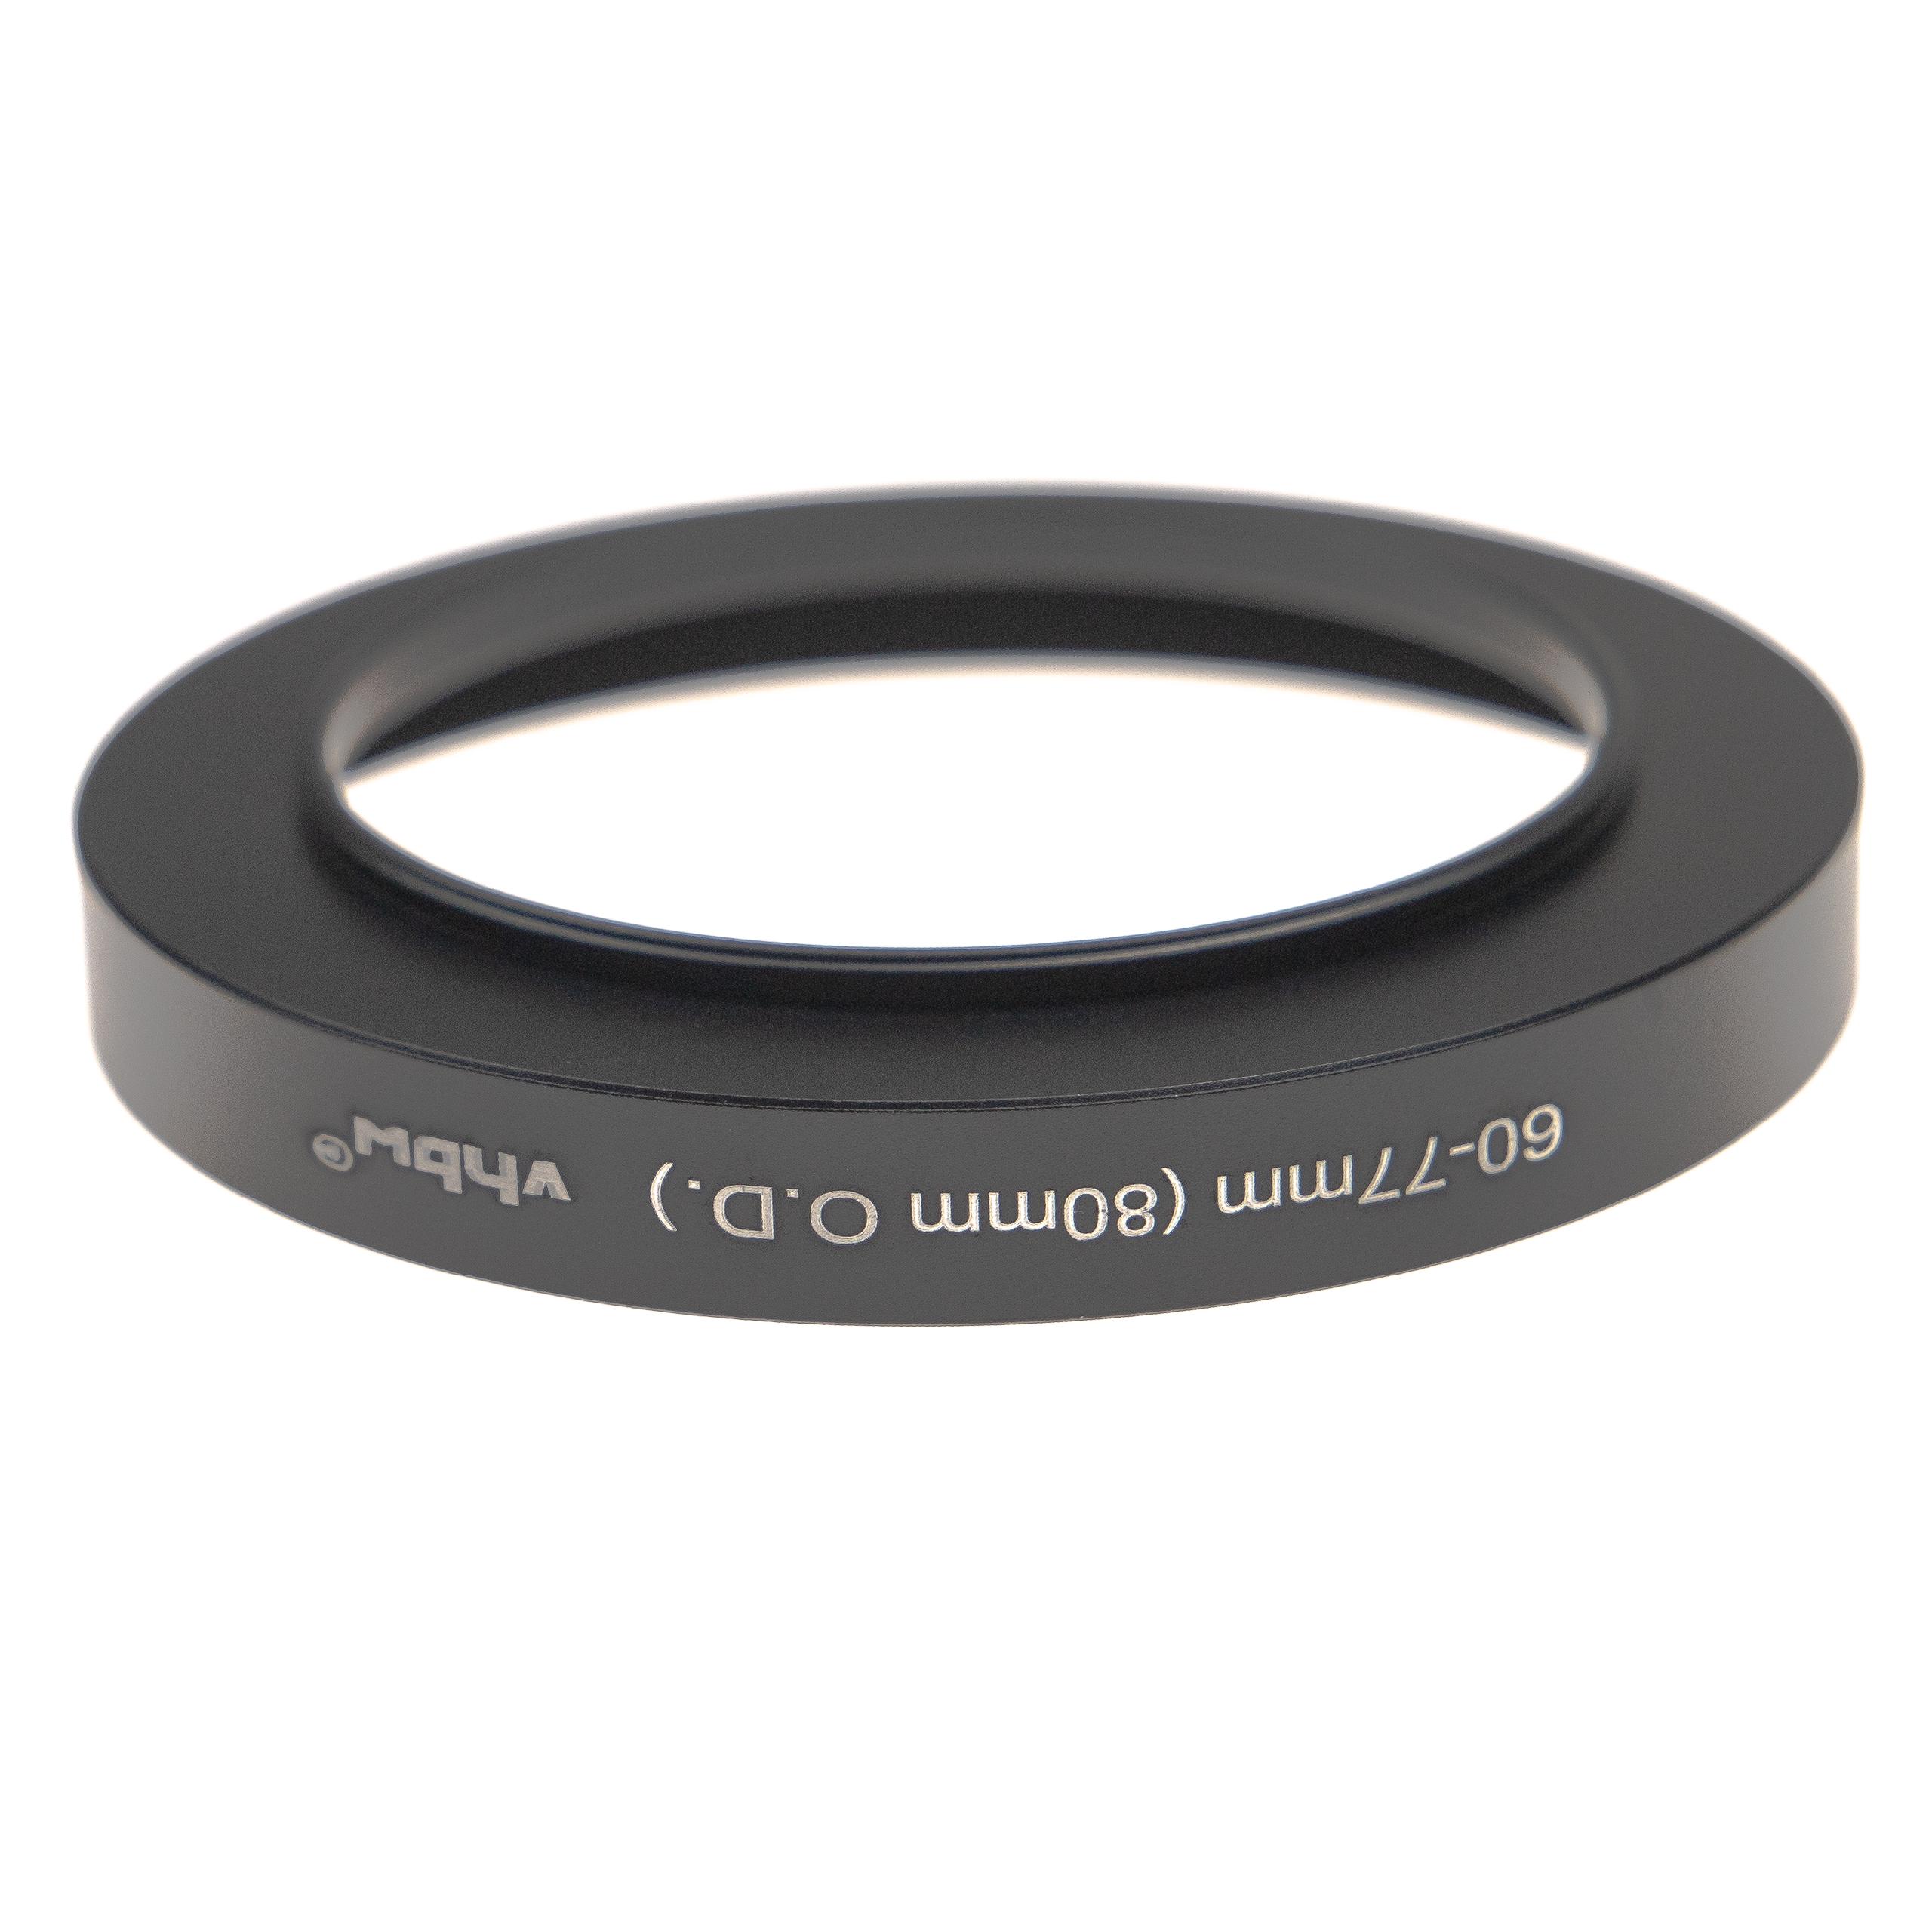 Step-Up Ring Adapter of 60 mm to 77 mm for matte box 80 mm O.D. - Filter Adapter